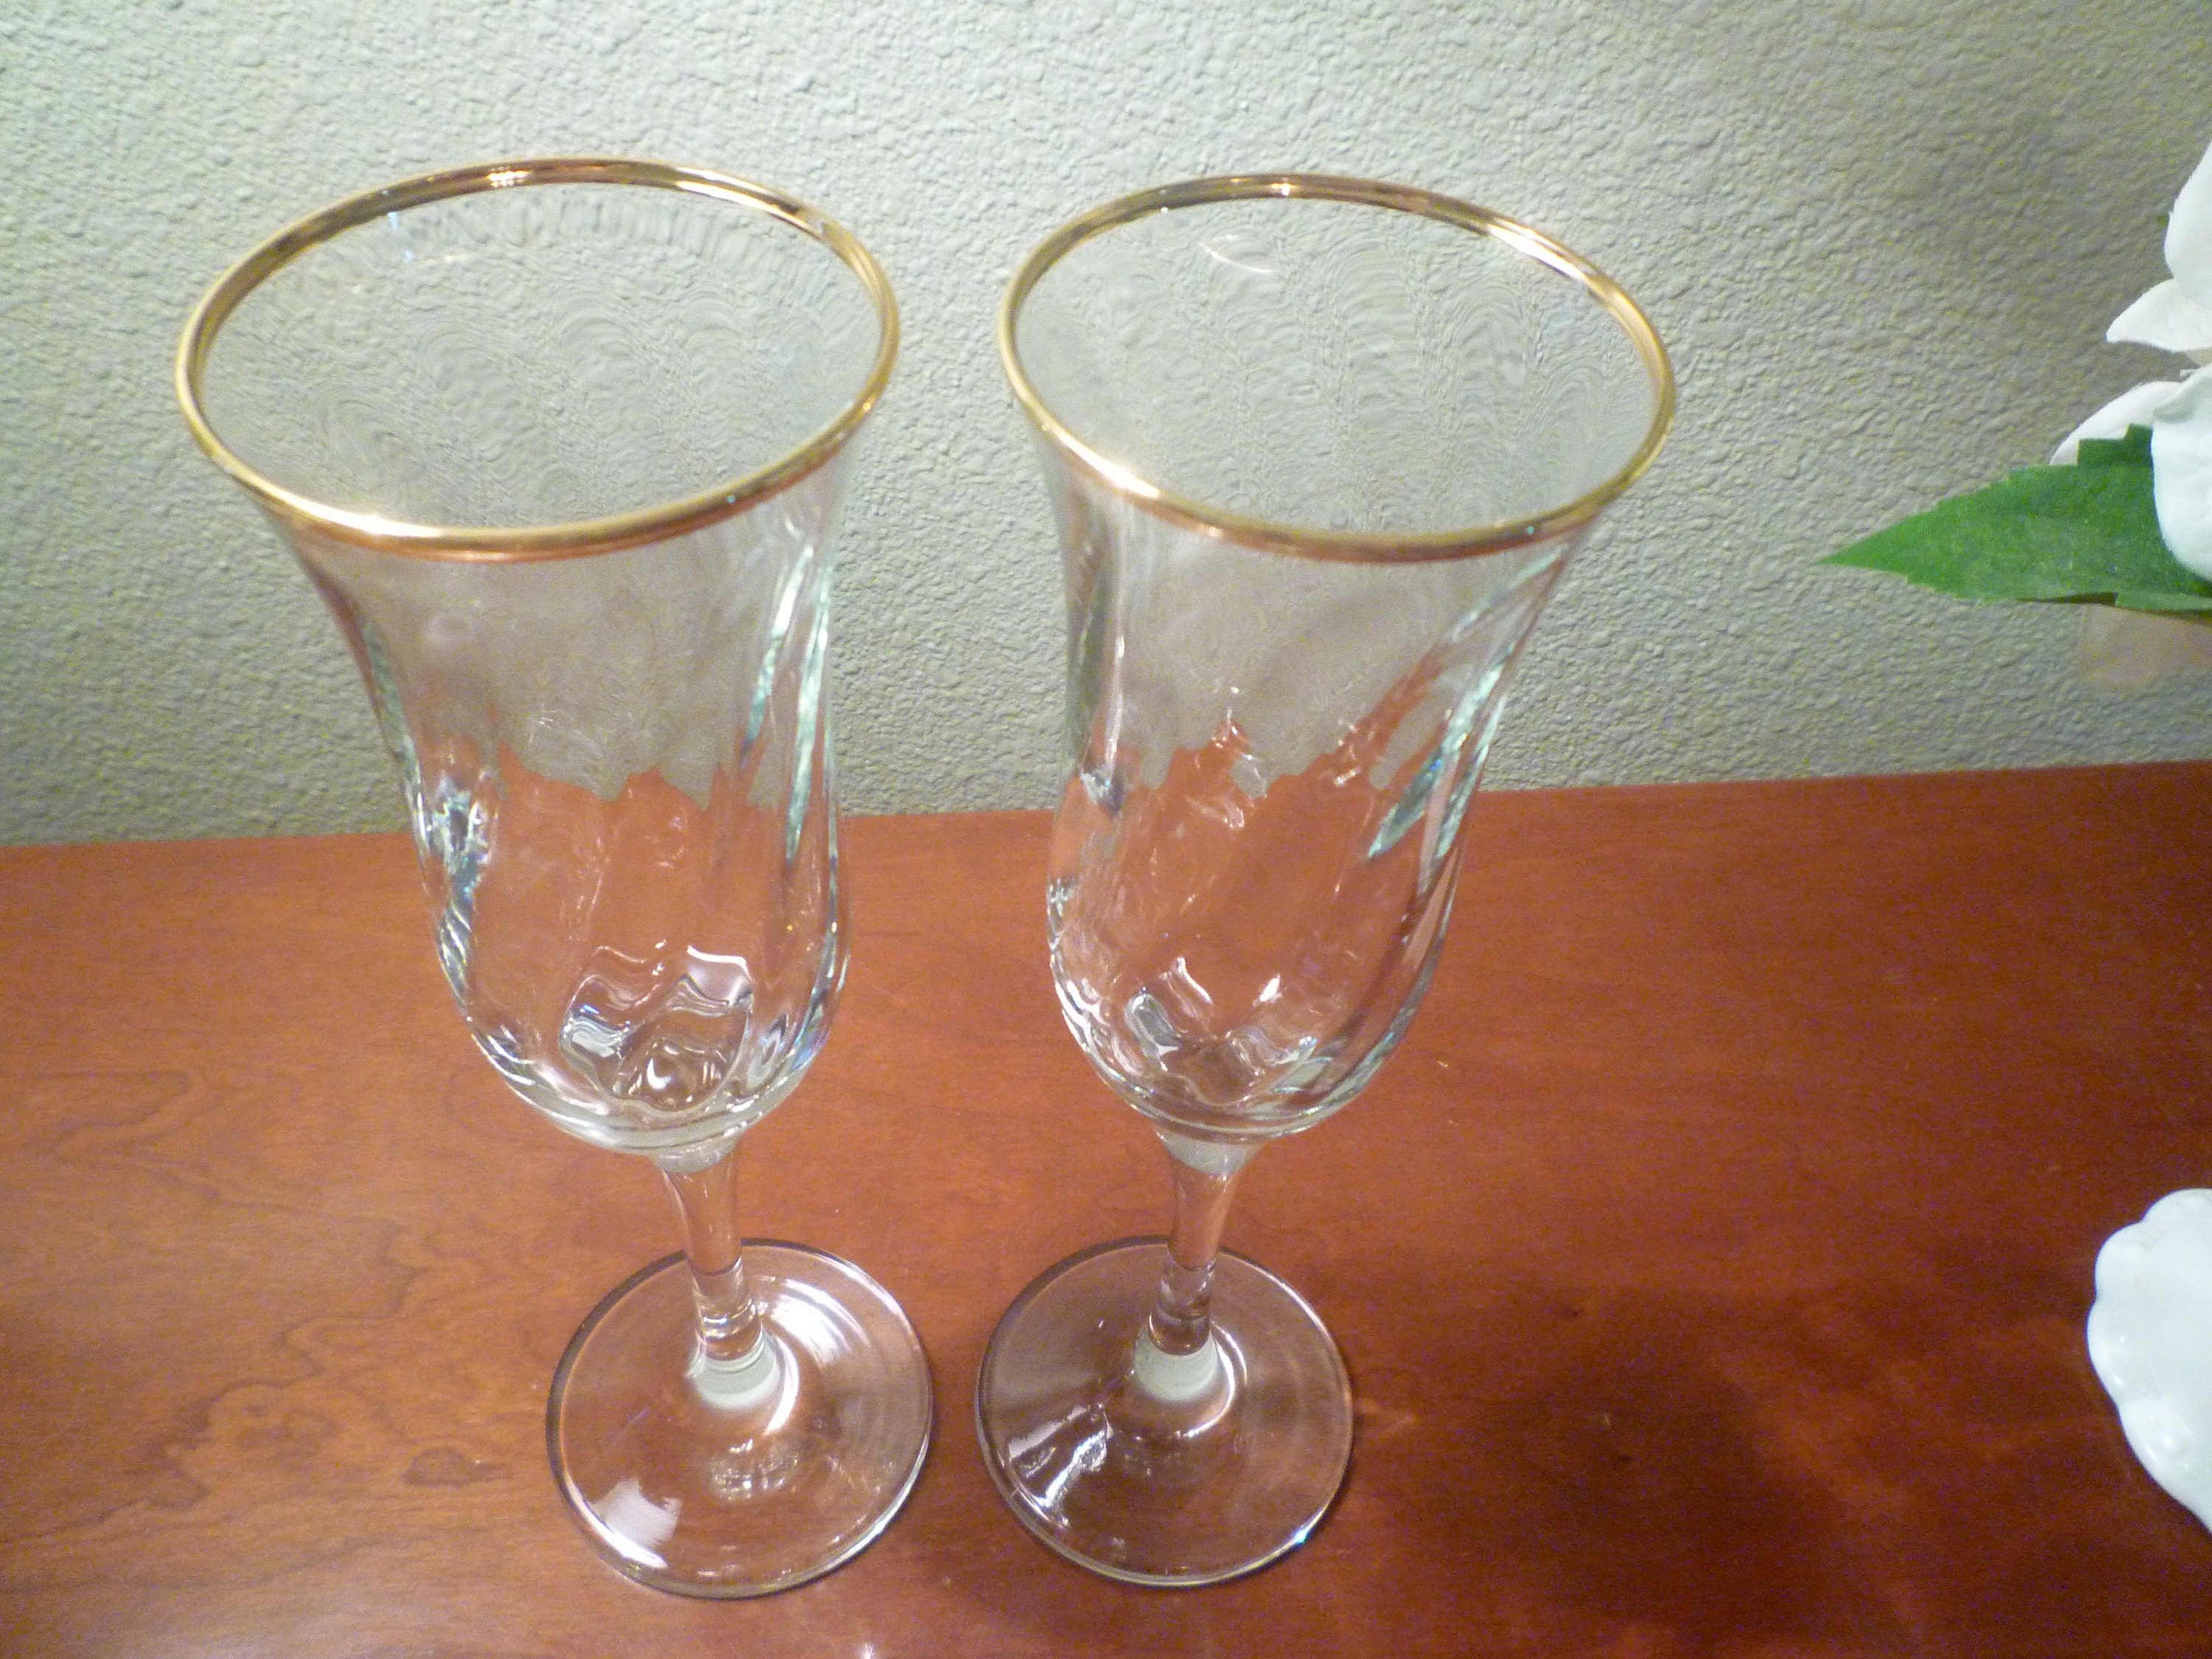 CHAMPAGNE FLUTES. Sets of 2 TOASTING Glasses. Tall and Elegant | Etsy